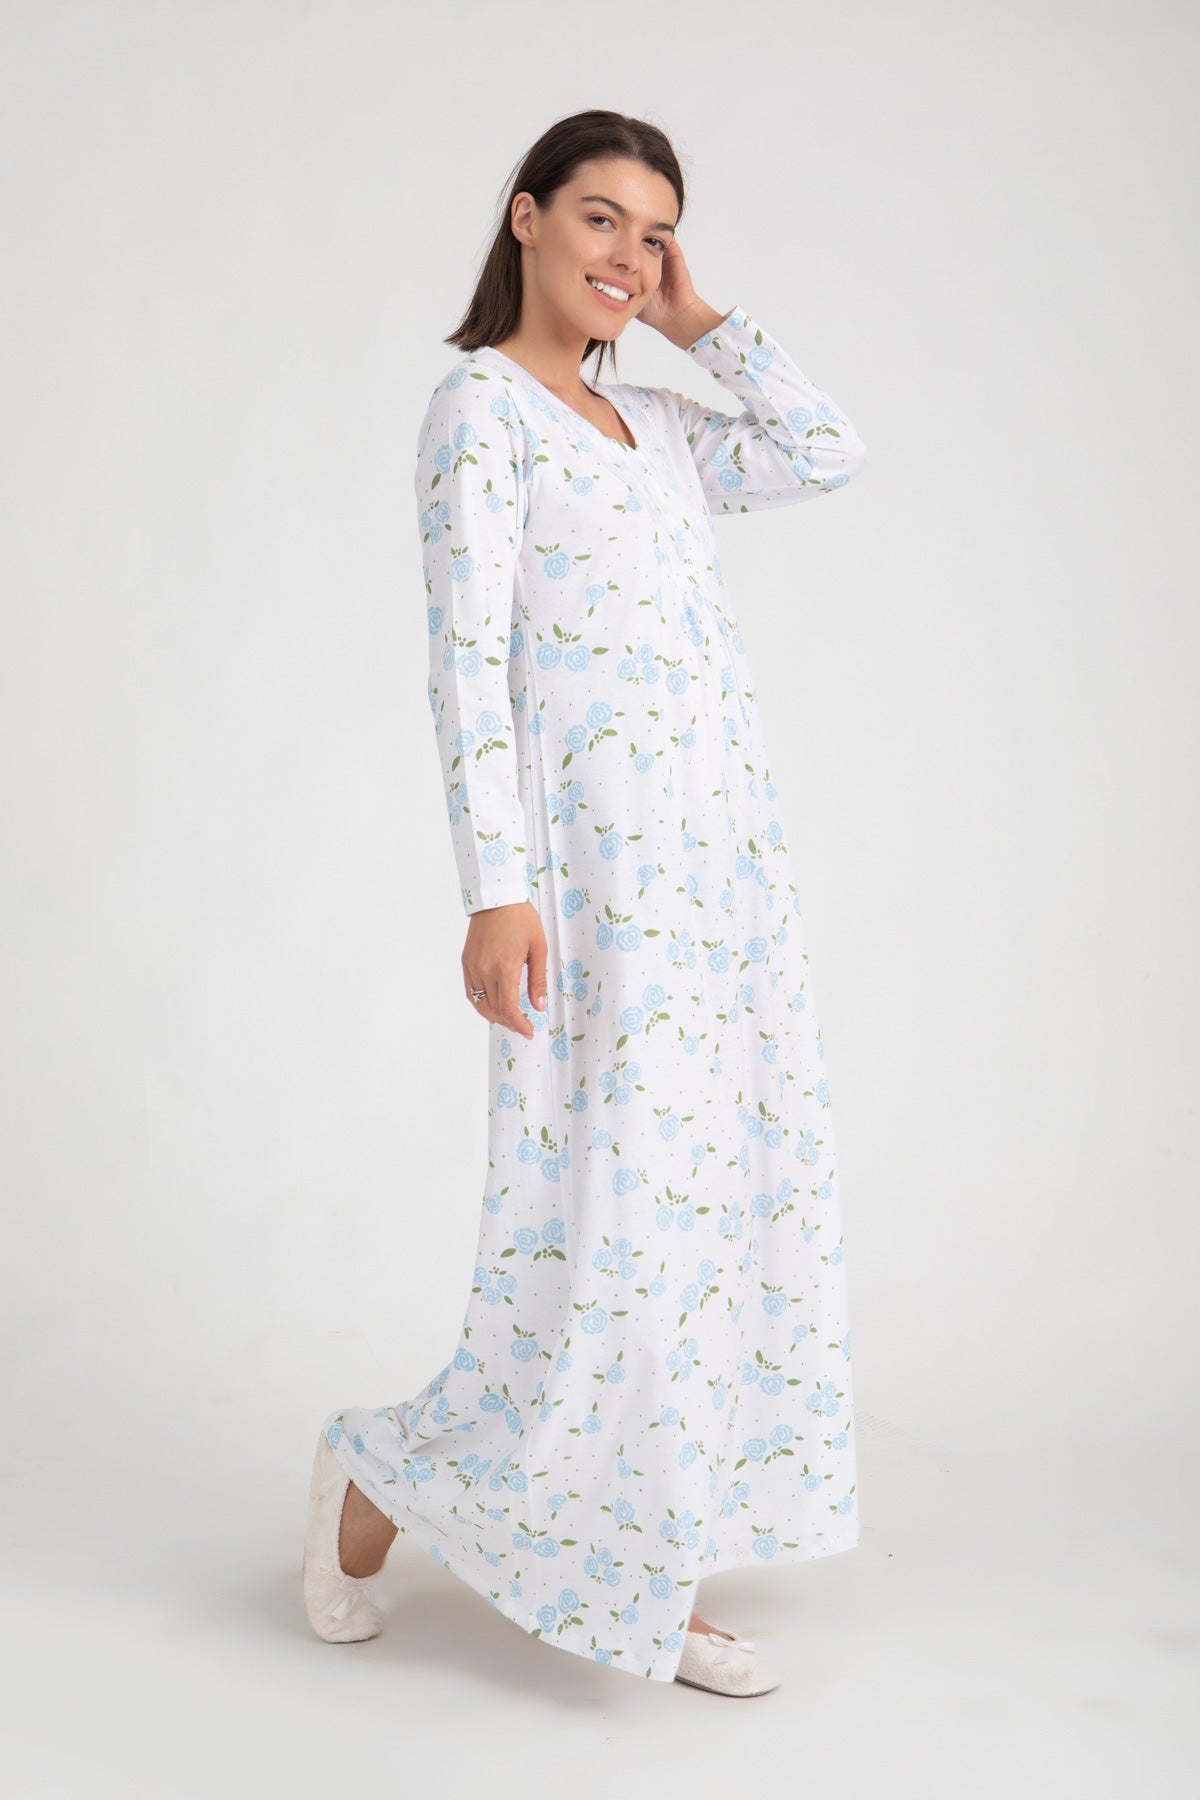 Roses Print Long Sleeve Nightgown With Lace detail